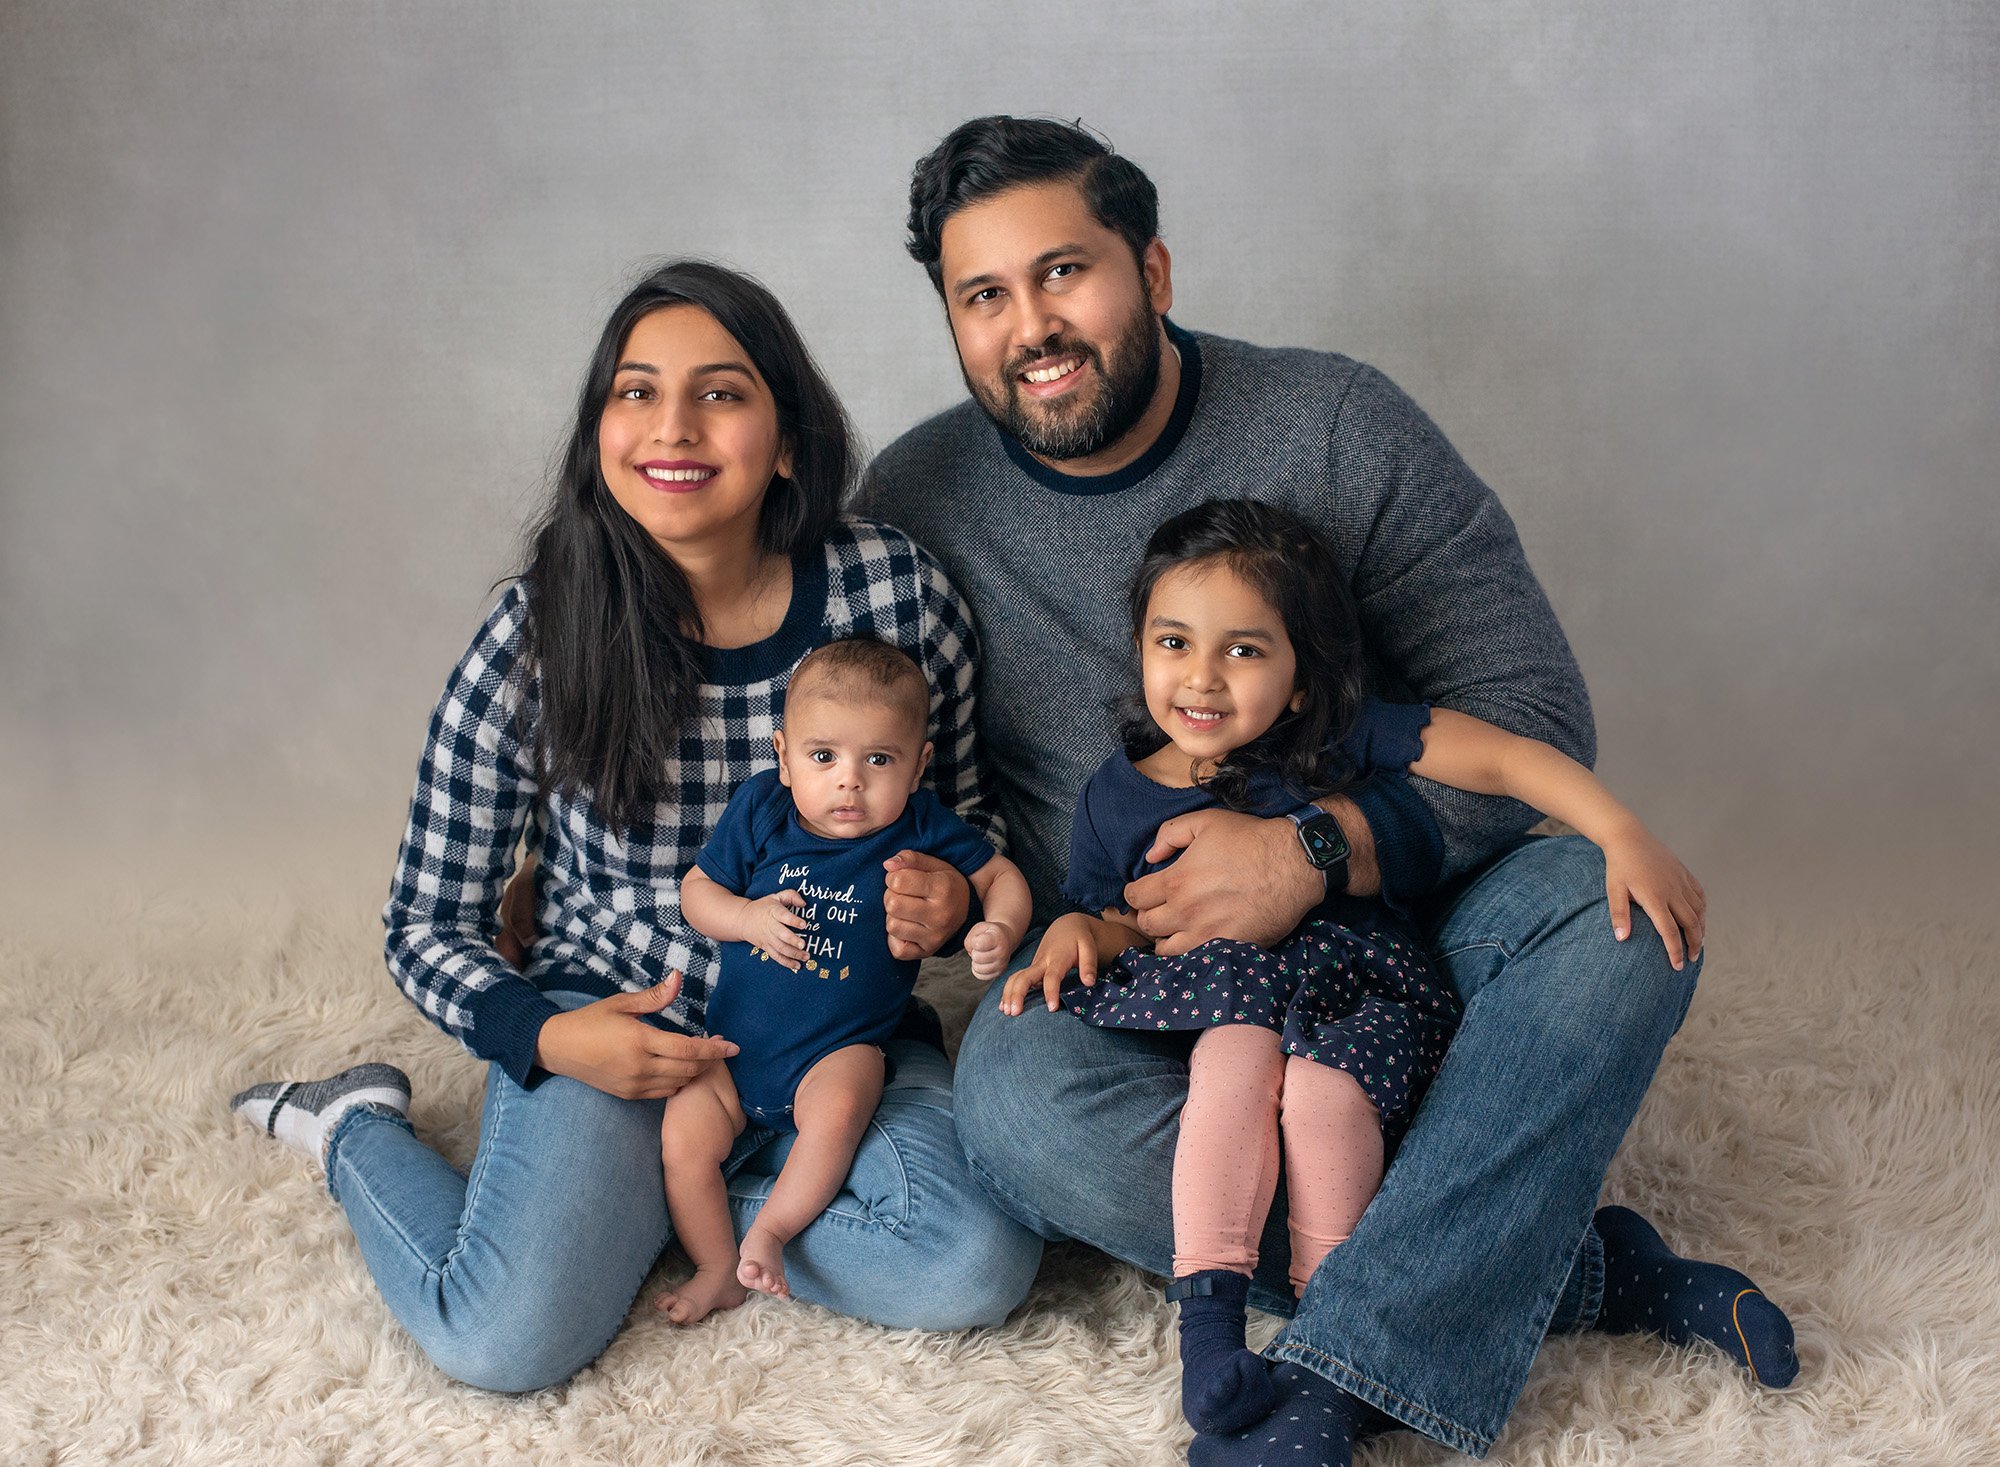 family of 4 posing together wearing navy blue on gray backdrop